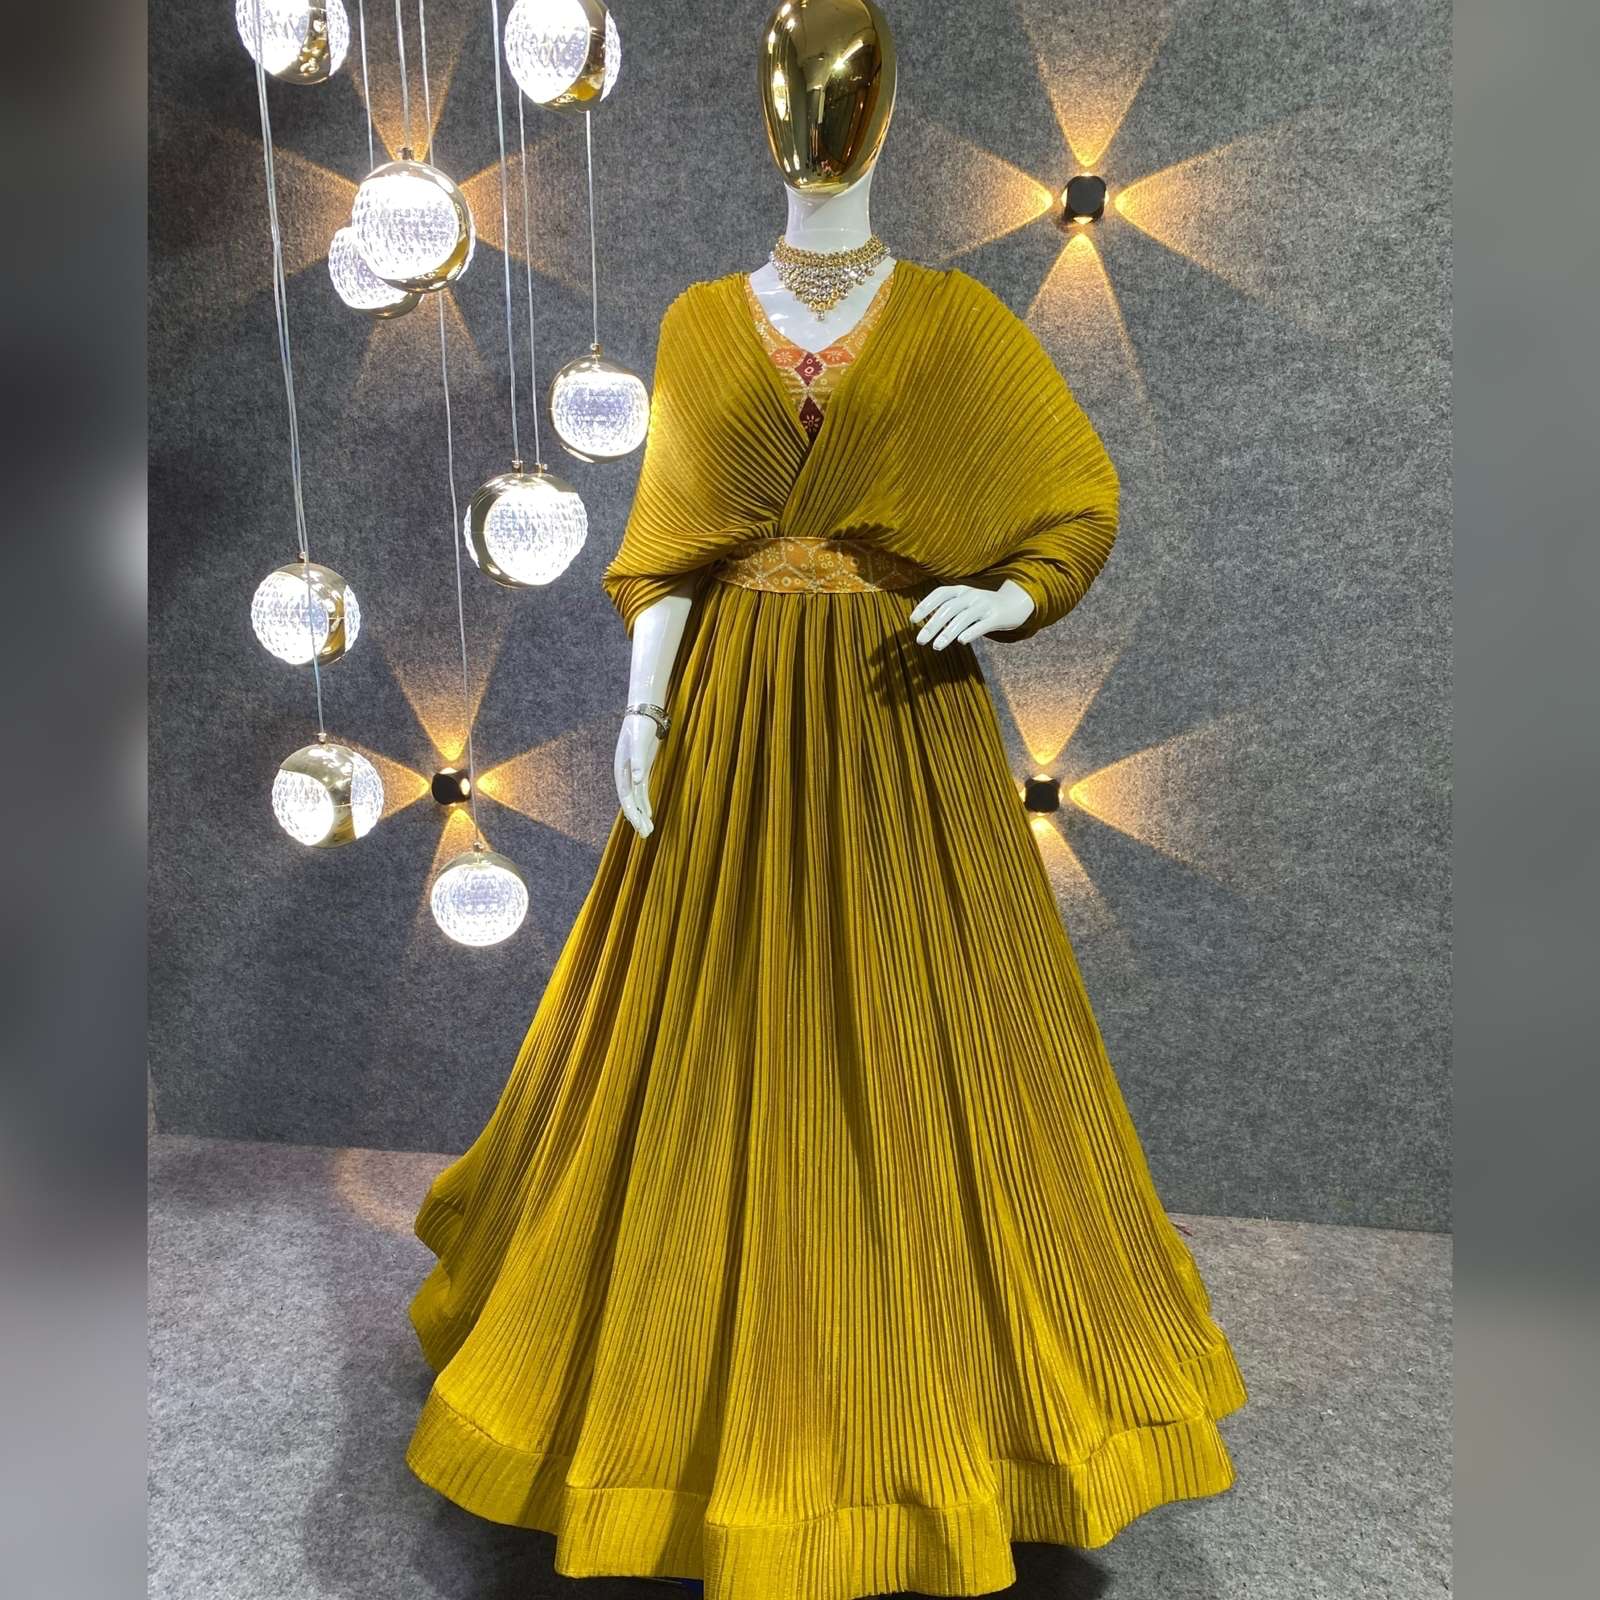 Women's Gowns: Best Women's Gowns for Weddings in India - The Economic Times